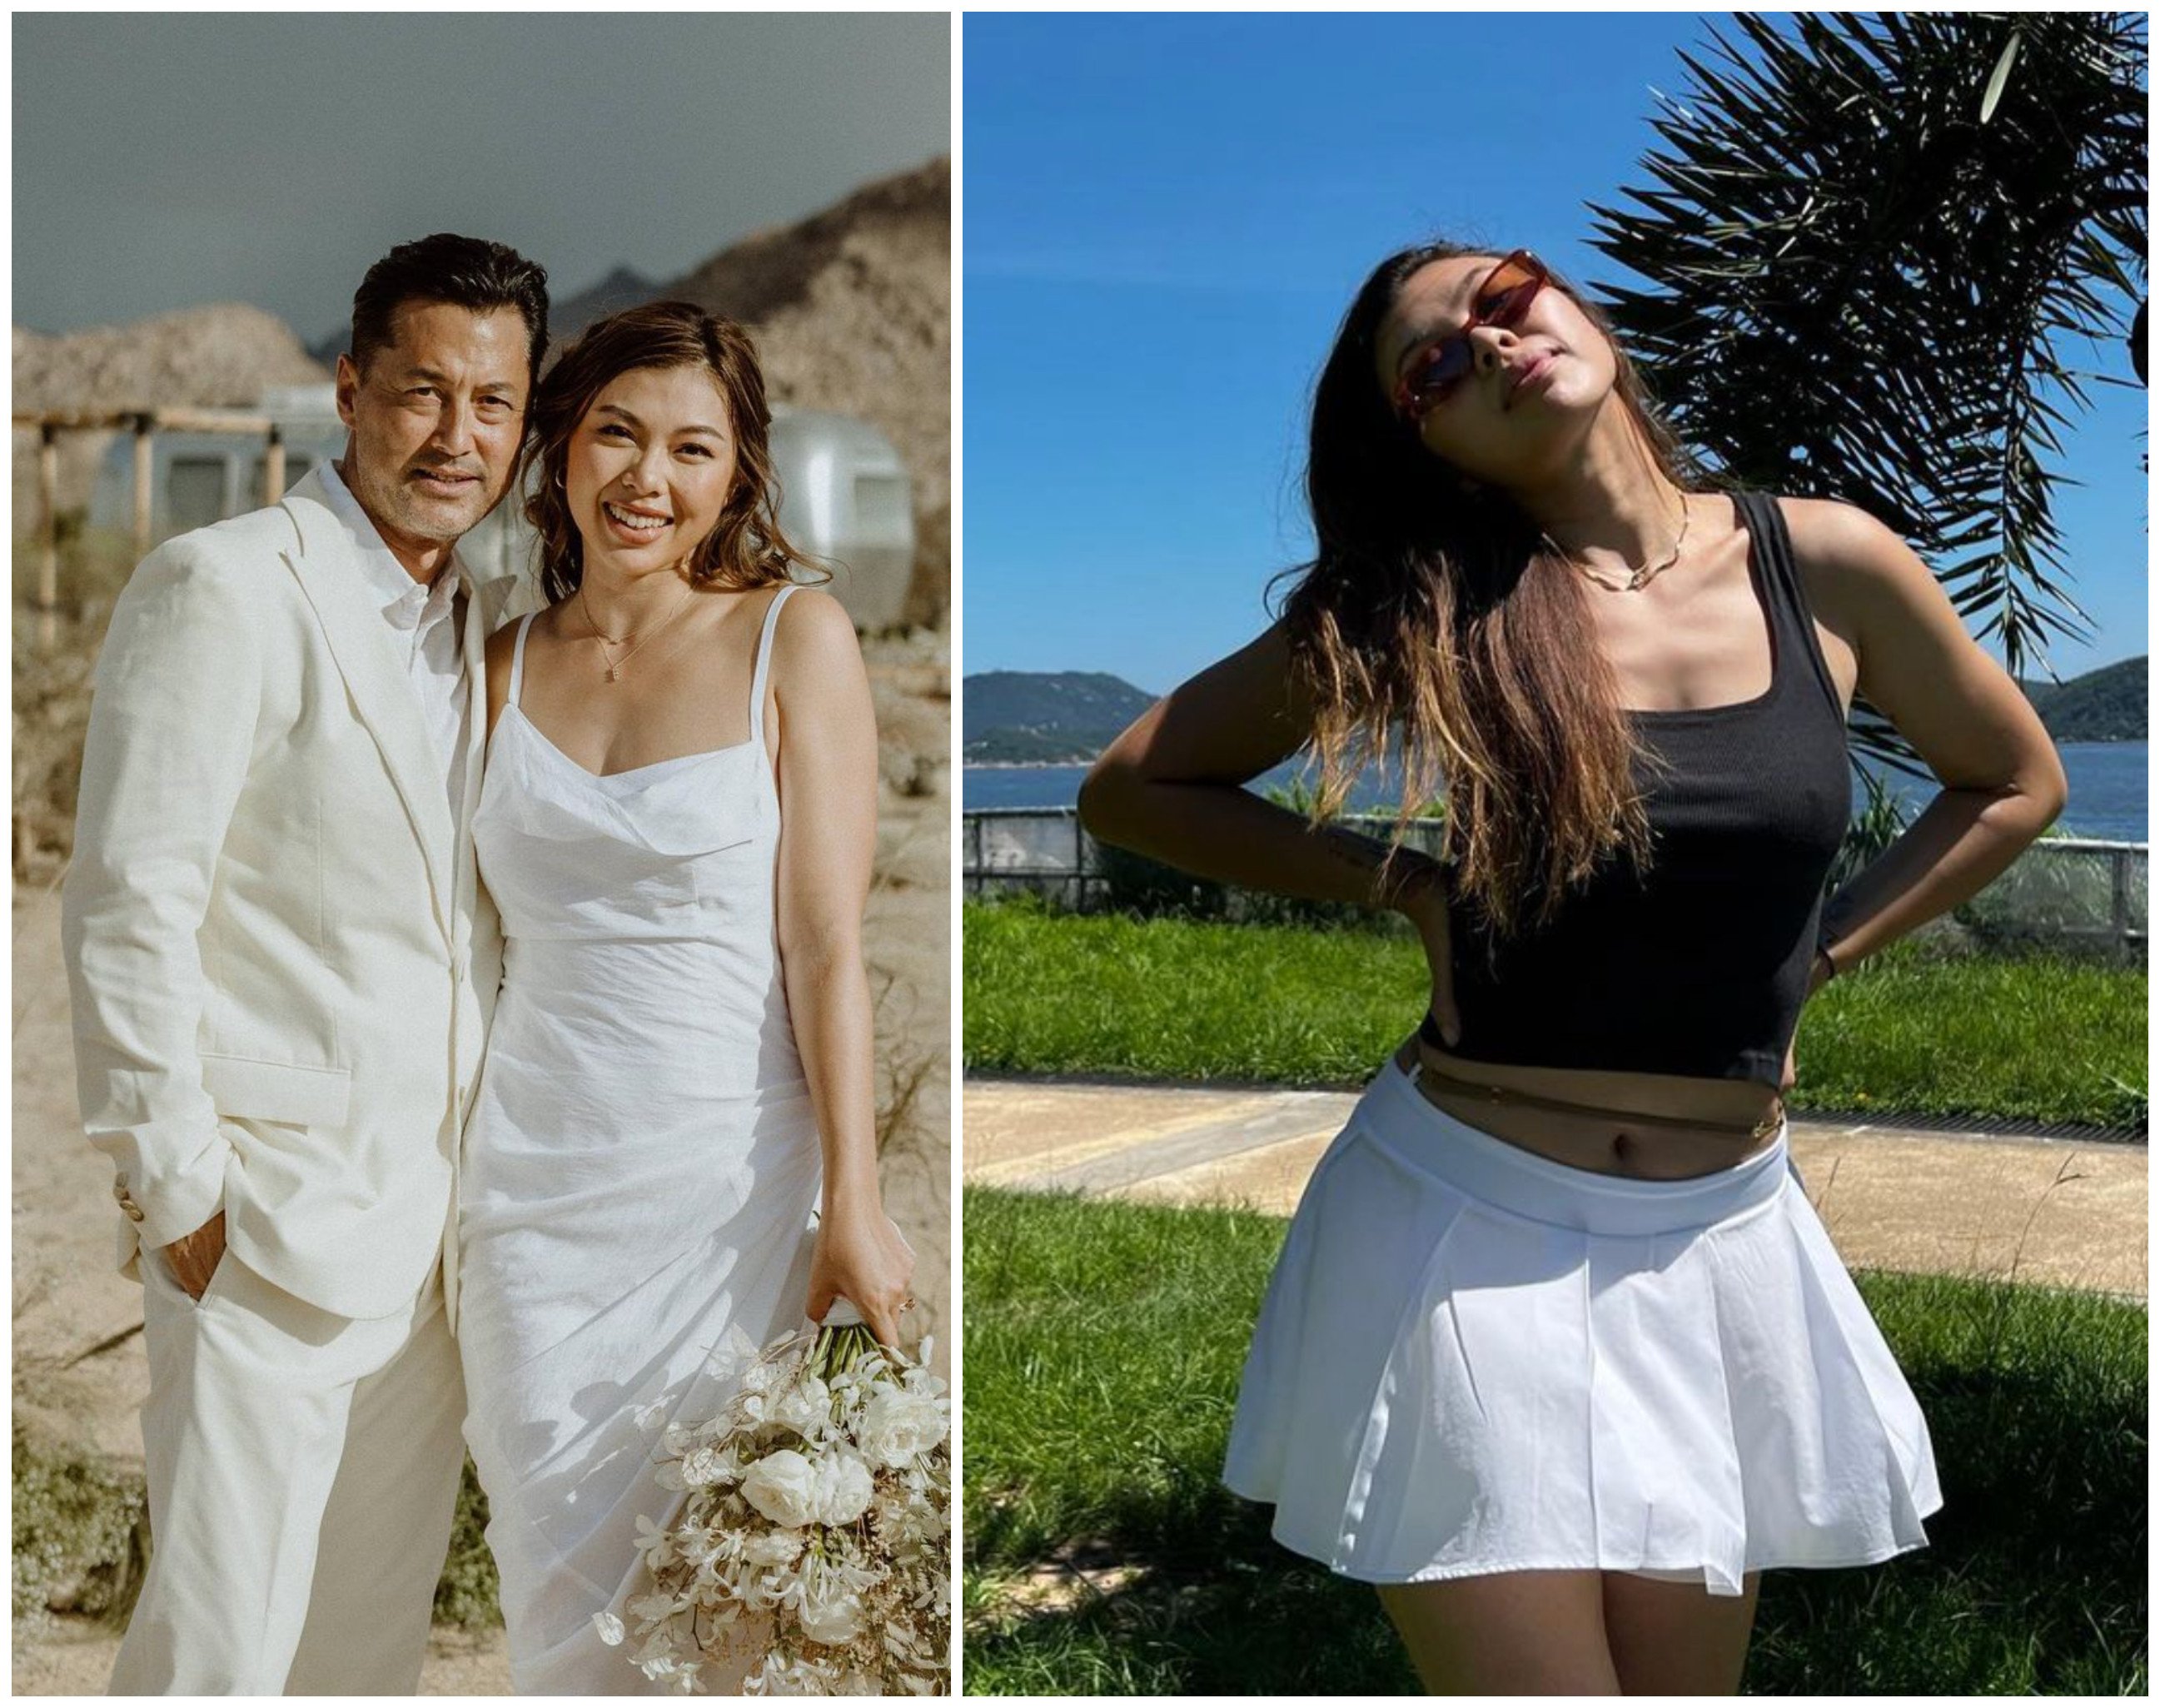 Meet Michael Wongs LGBT activist daughter Kayla the entrepreneur and her new property heiress wife Elaine Chen-Fernandez just moved from Hong Kong to LA, splashing US$6 million on a mansion South image